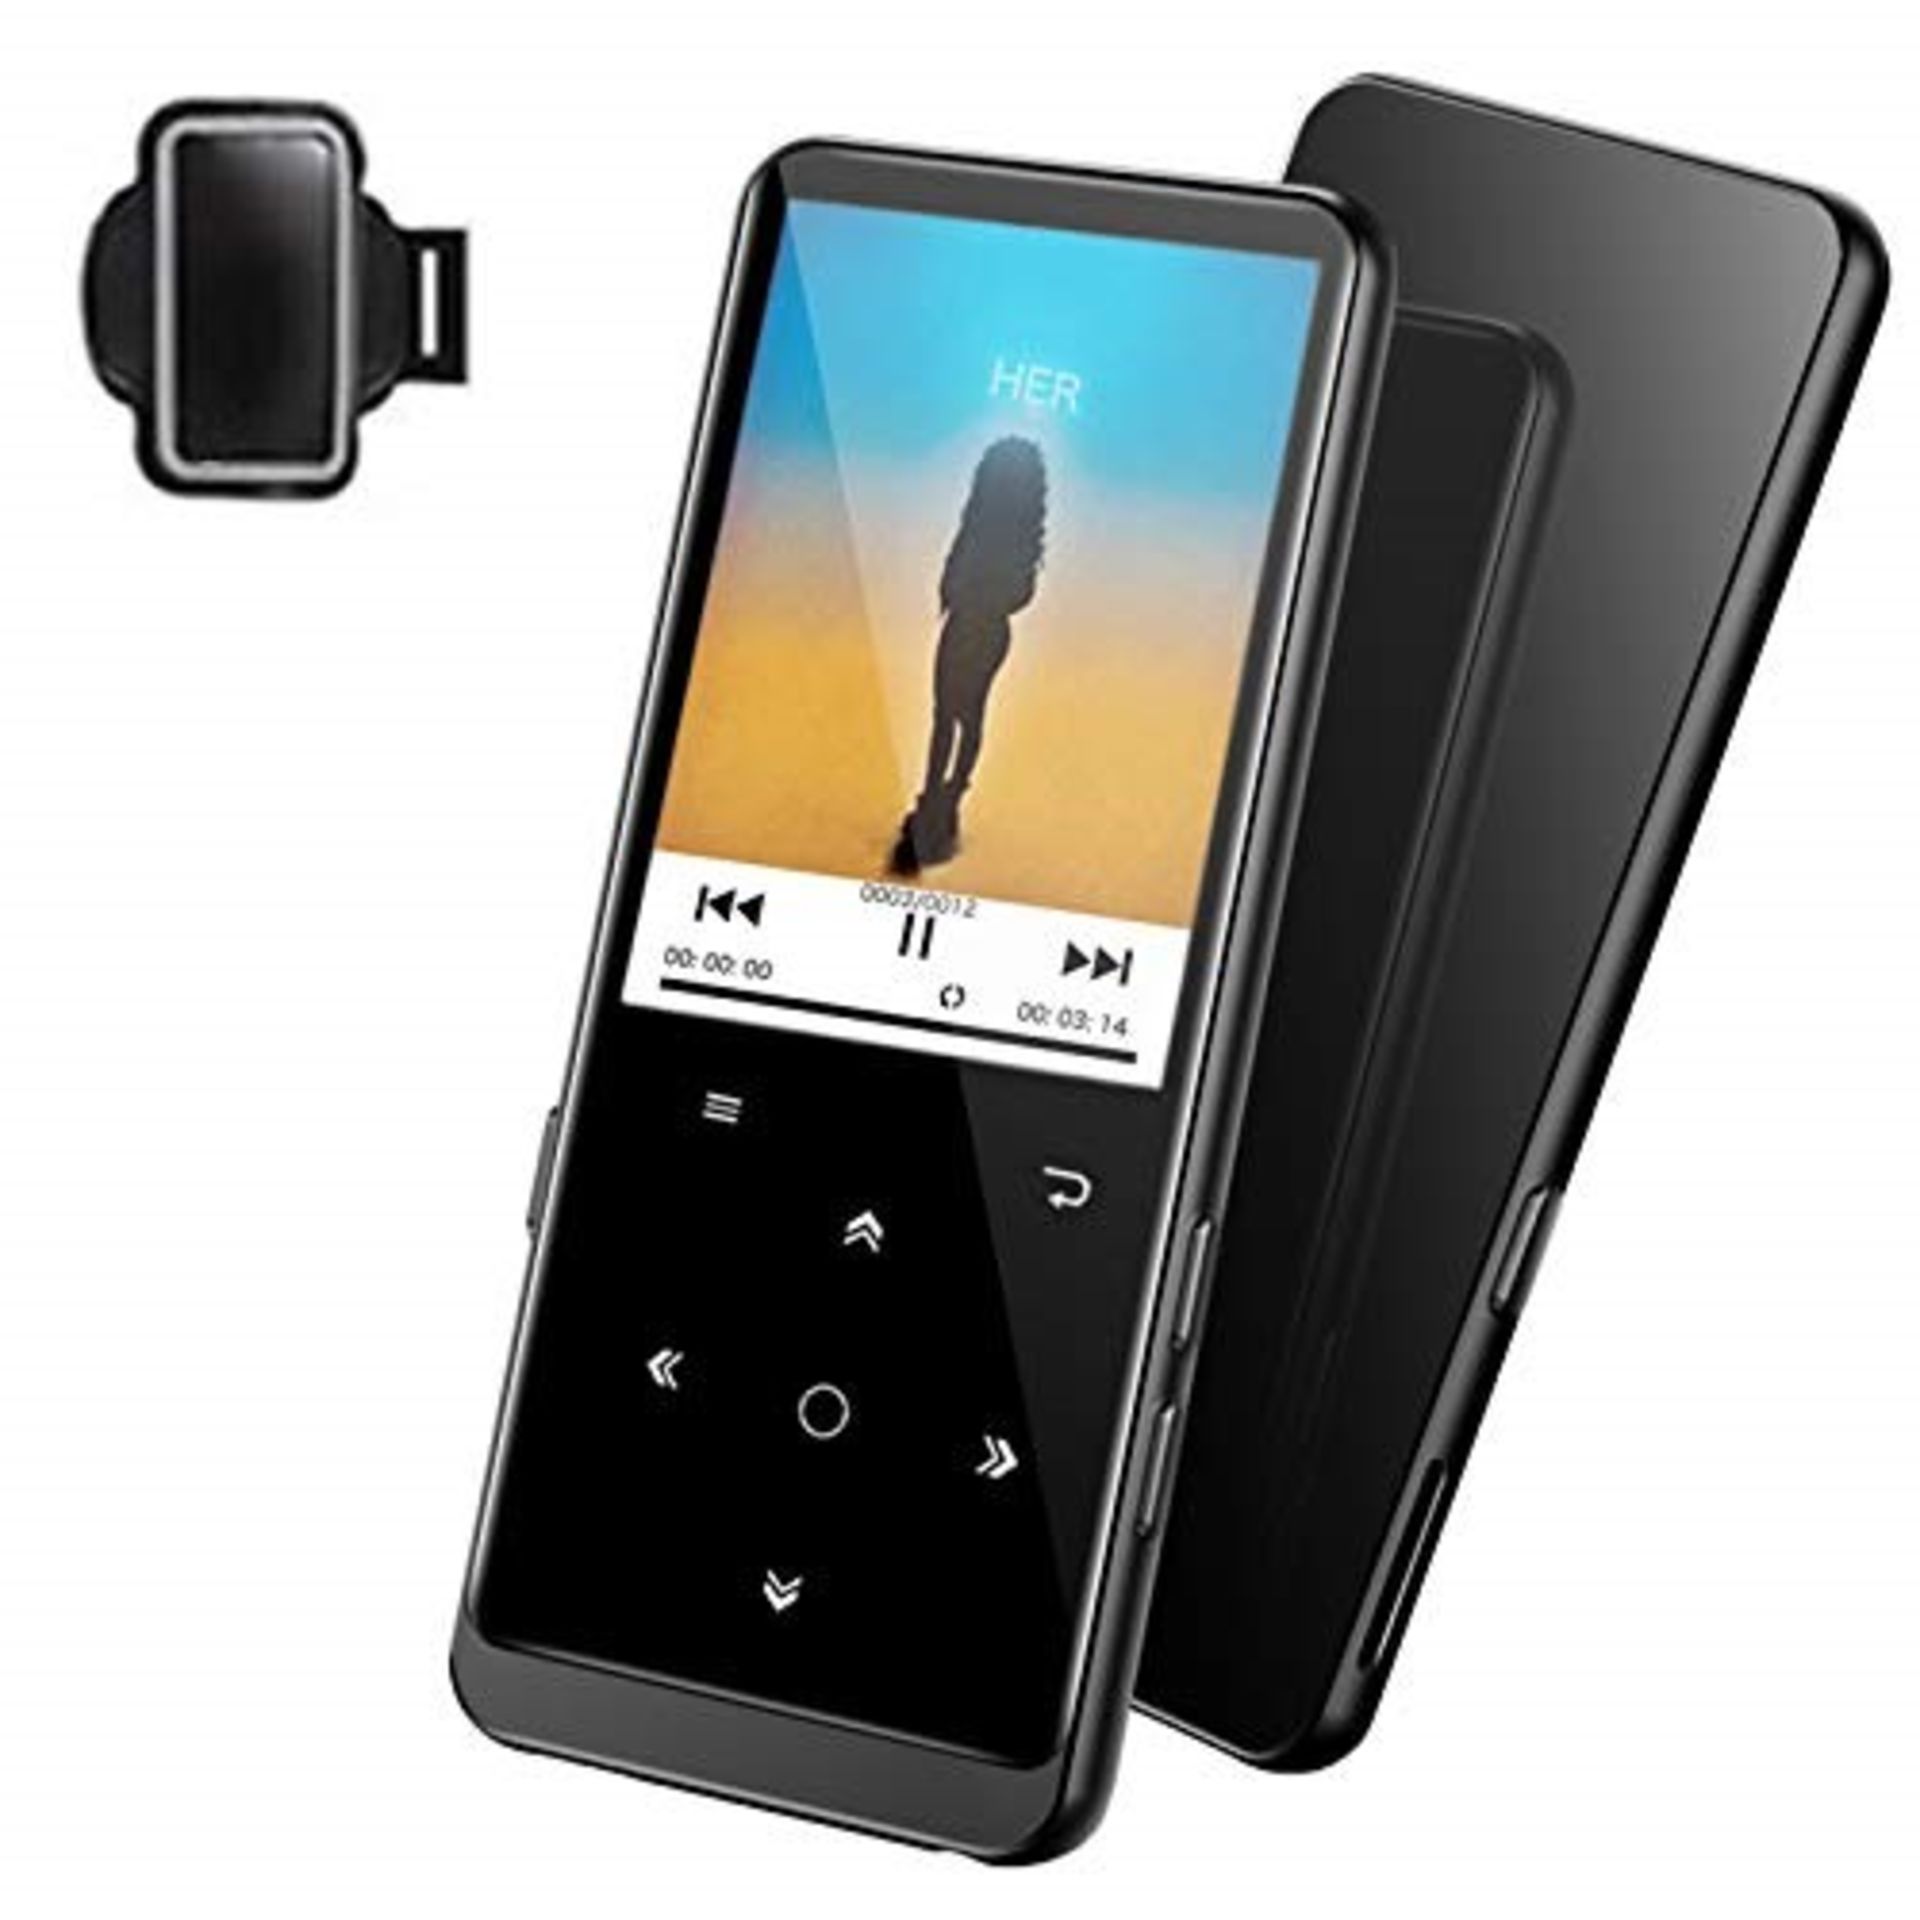 32GB MP3 Player, SUPEREYE MP3 Music Players with Bluetooth 4.2, 2.4" Large Screen, FM